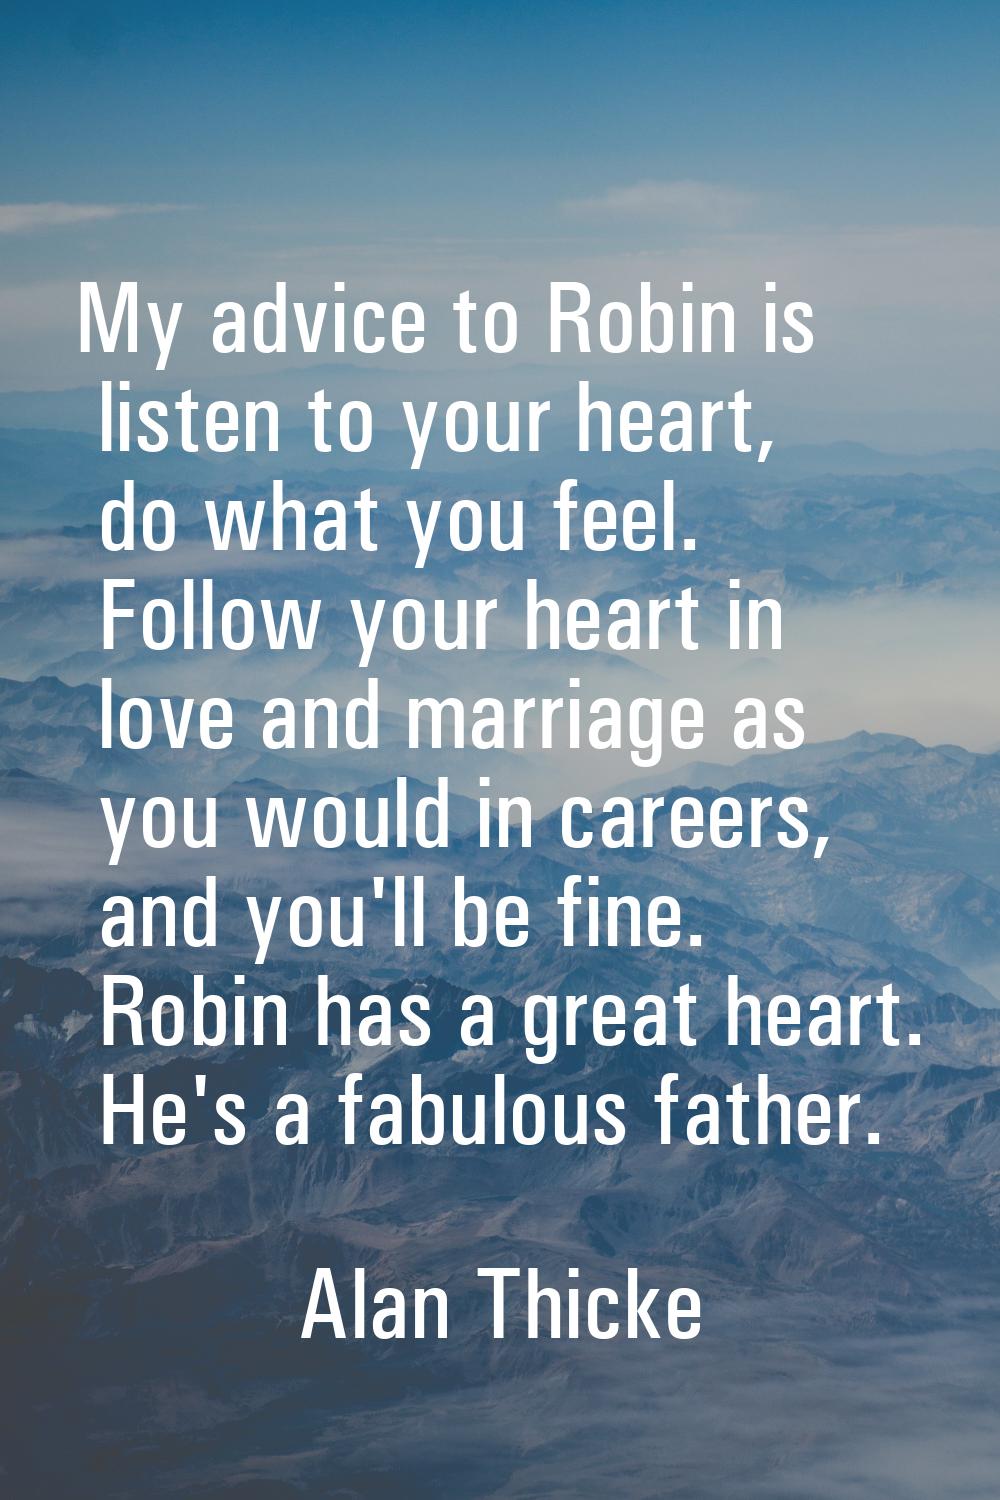 My advice to Robin is listen to your heart, do what you feel. Follow your heart in love and marriag